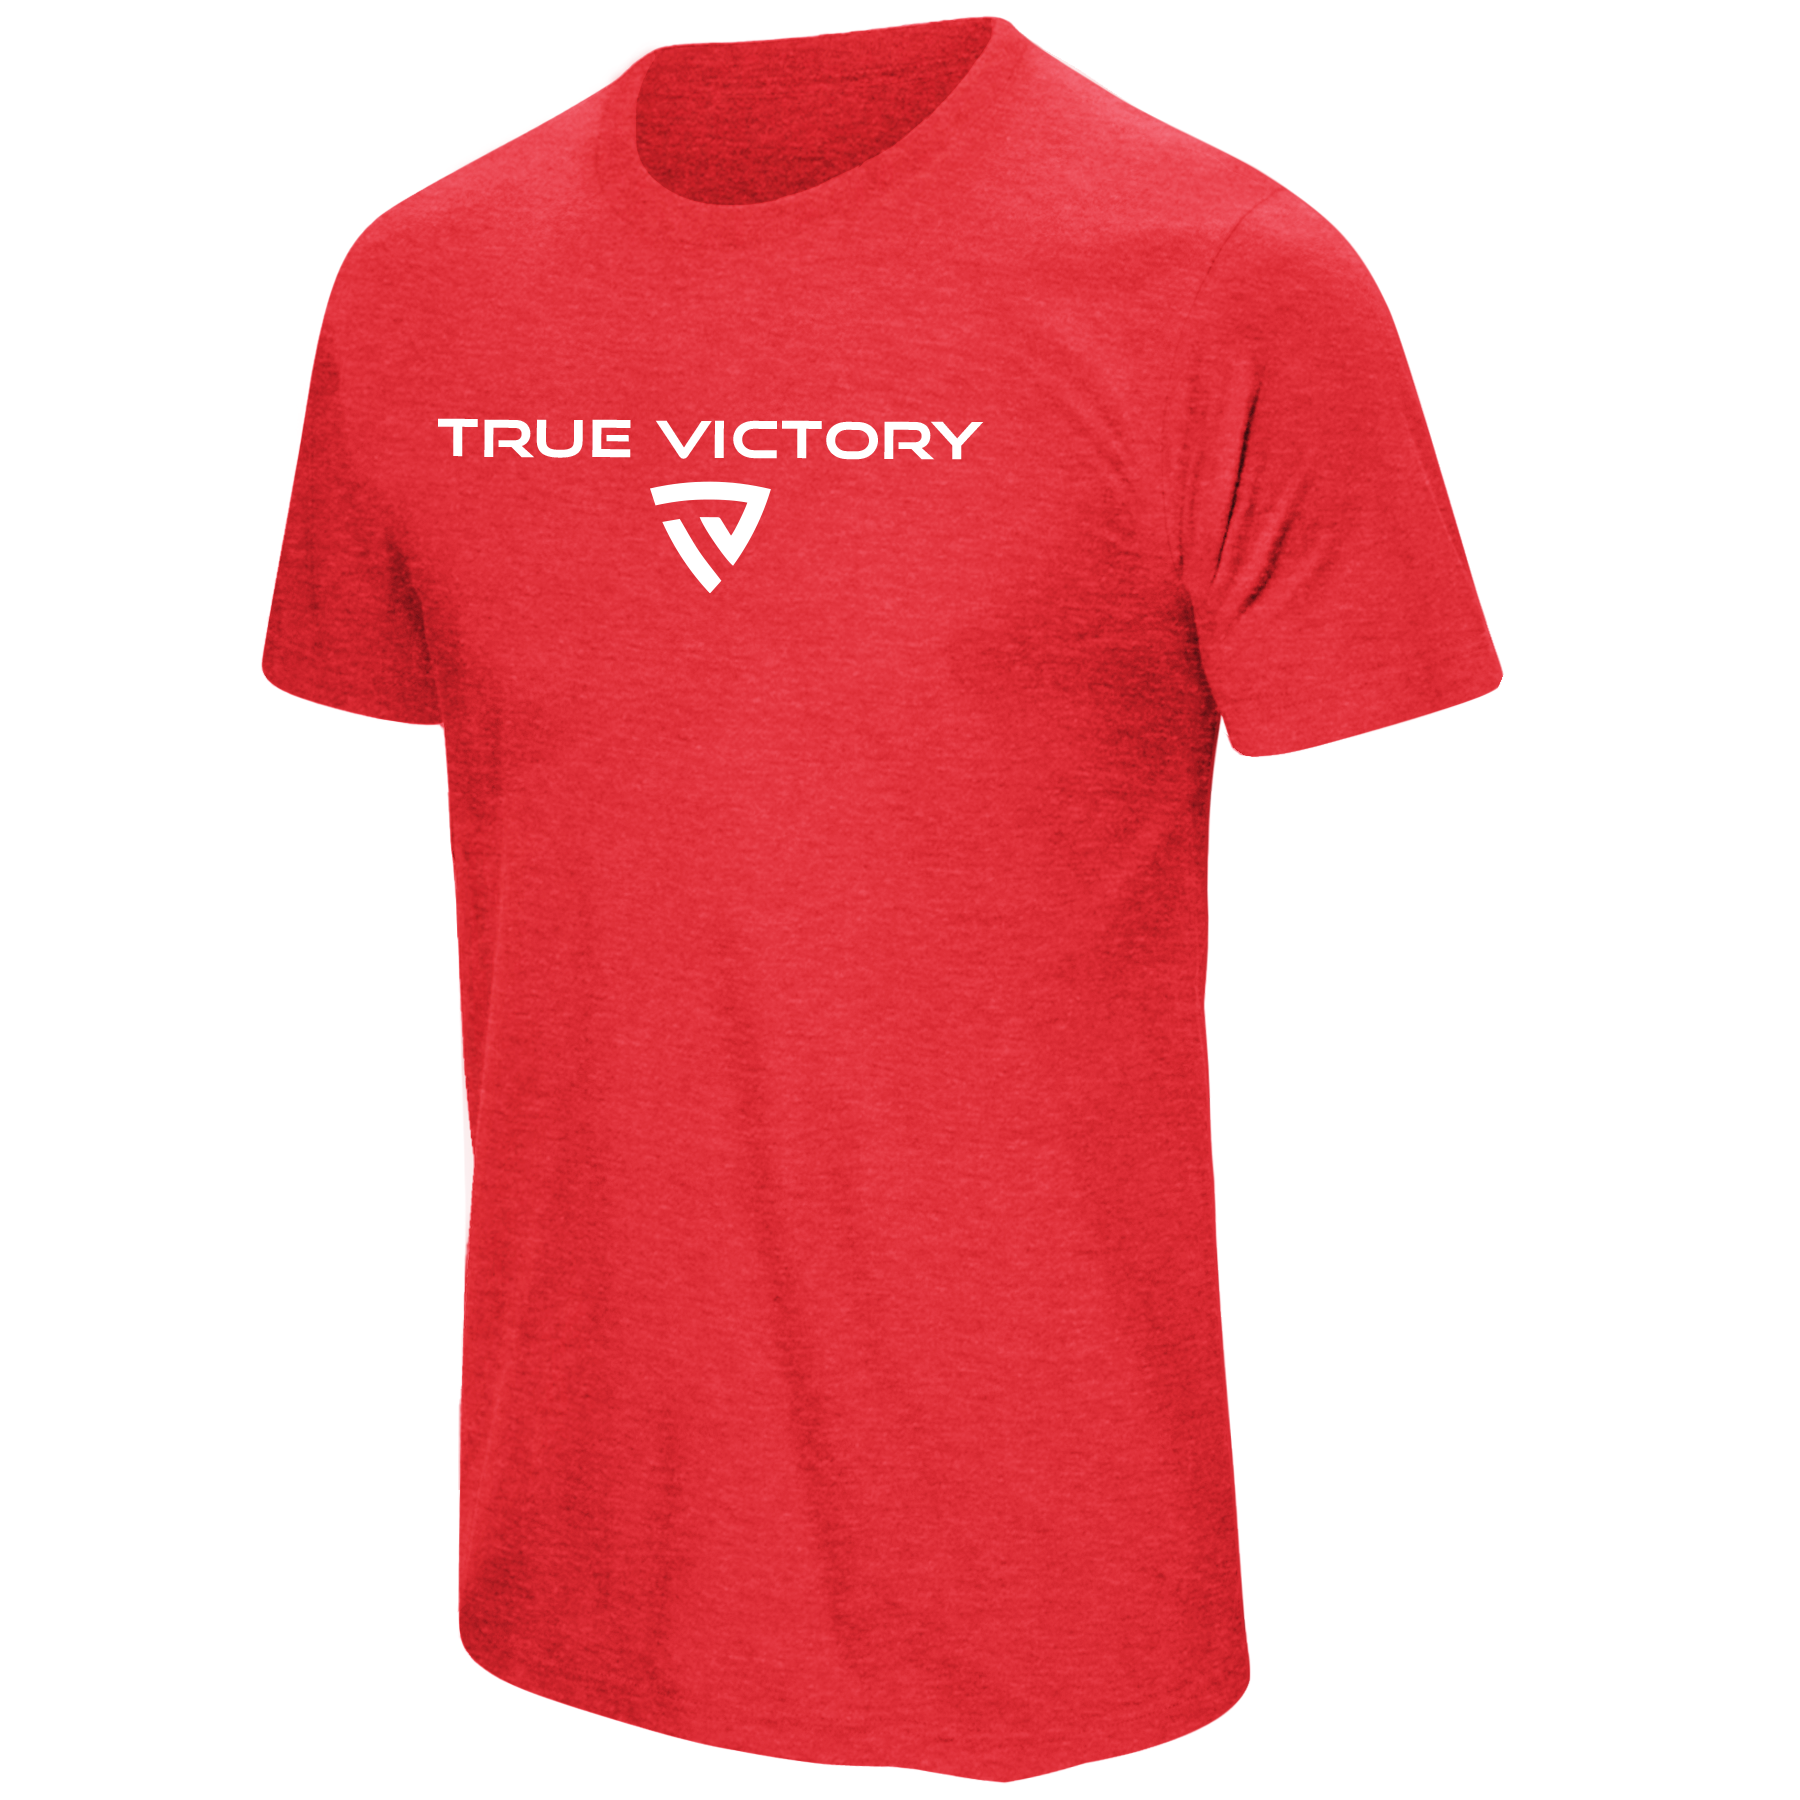 Men's Victorious Red Tee